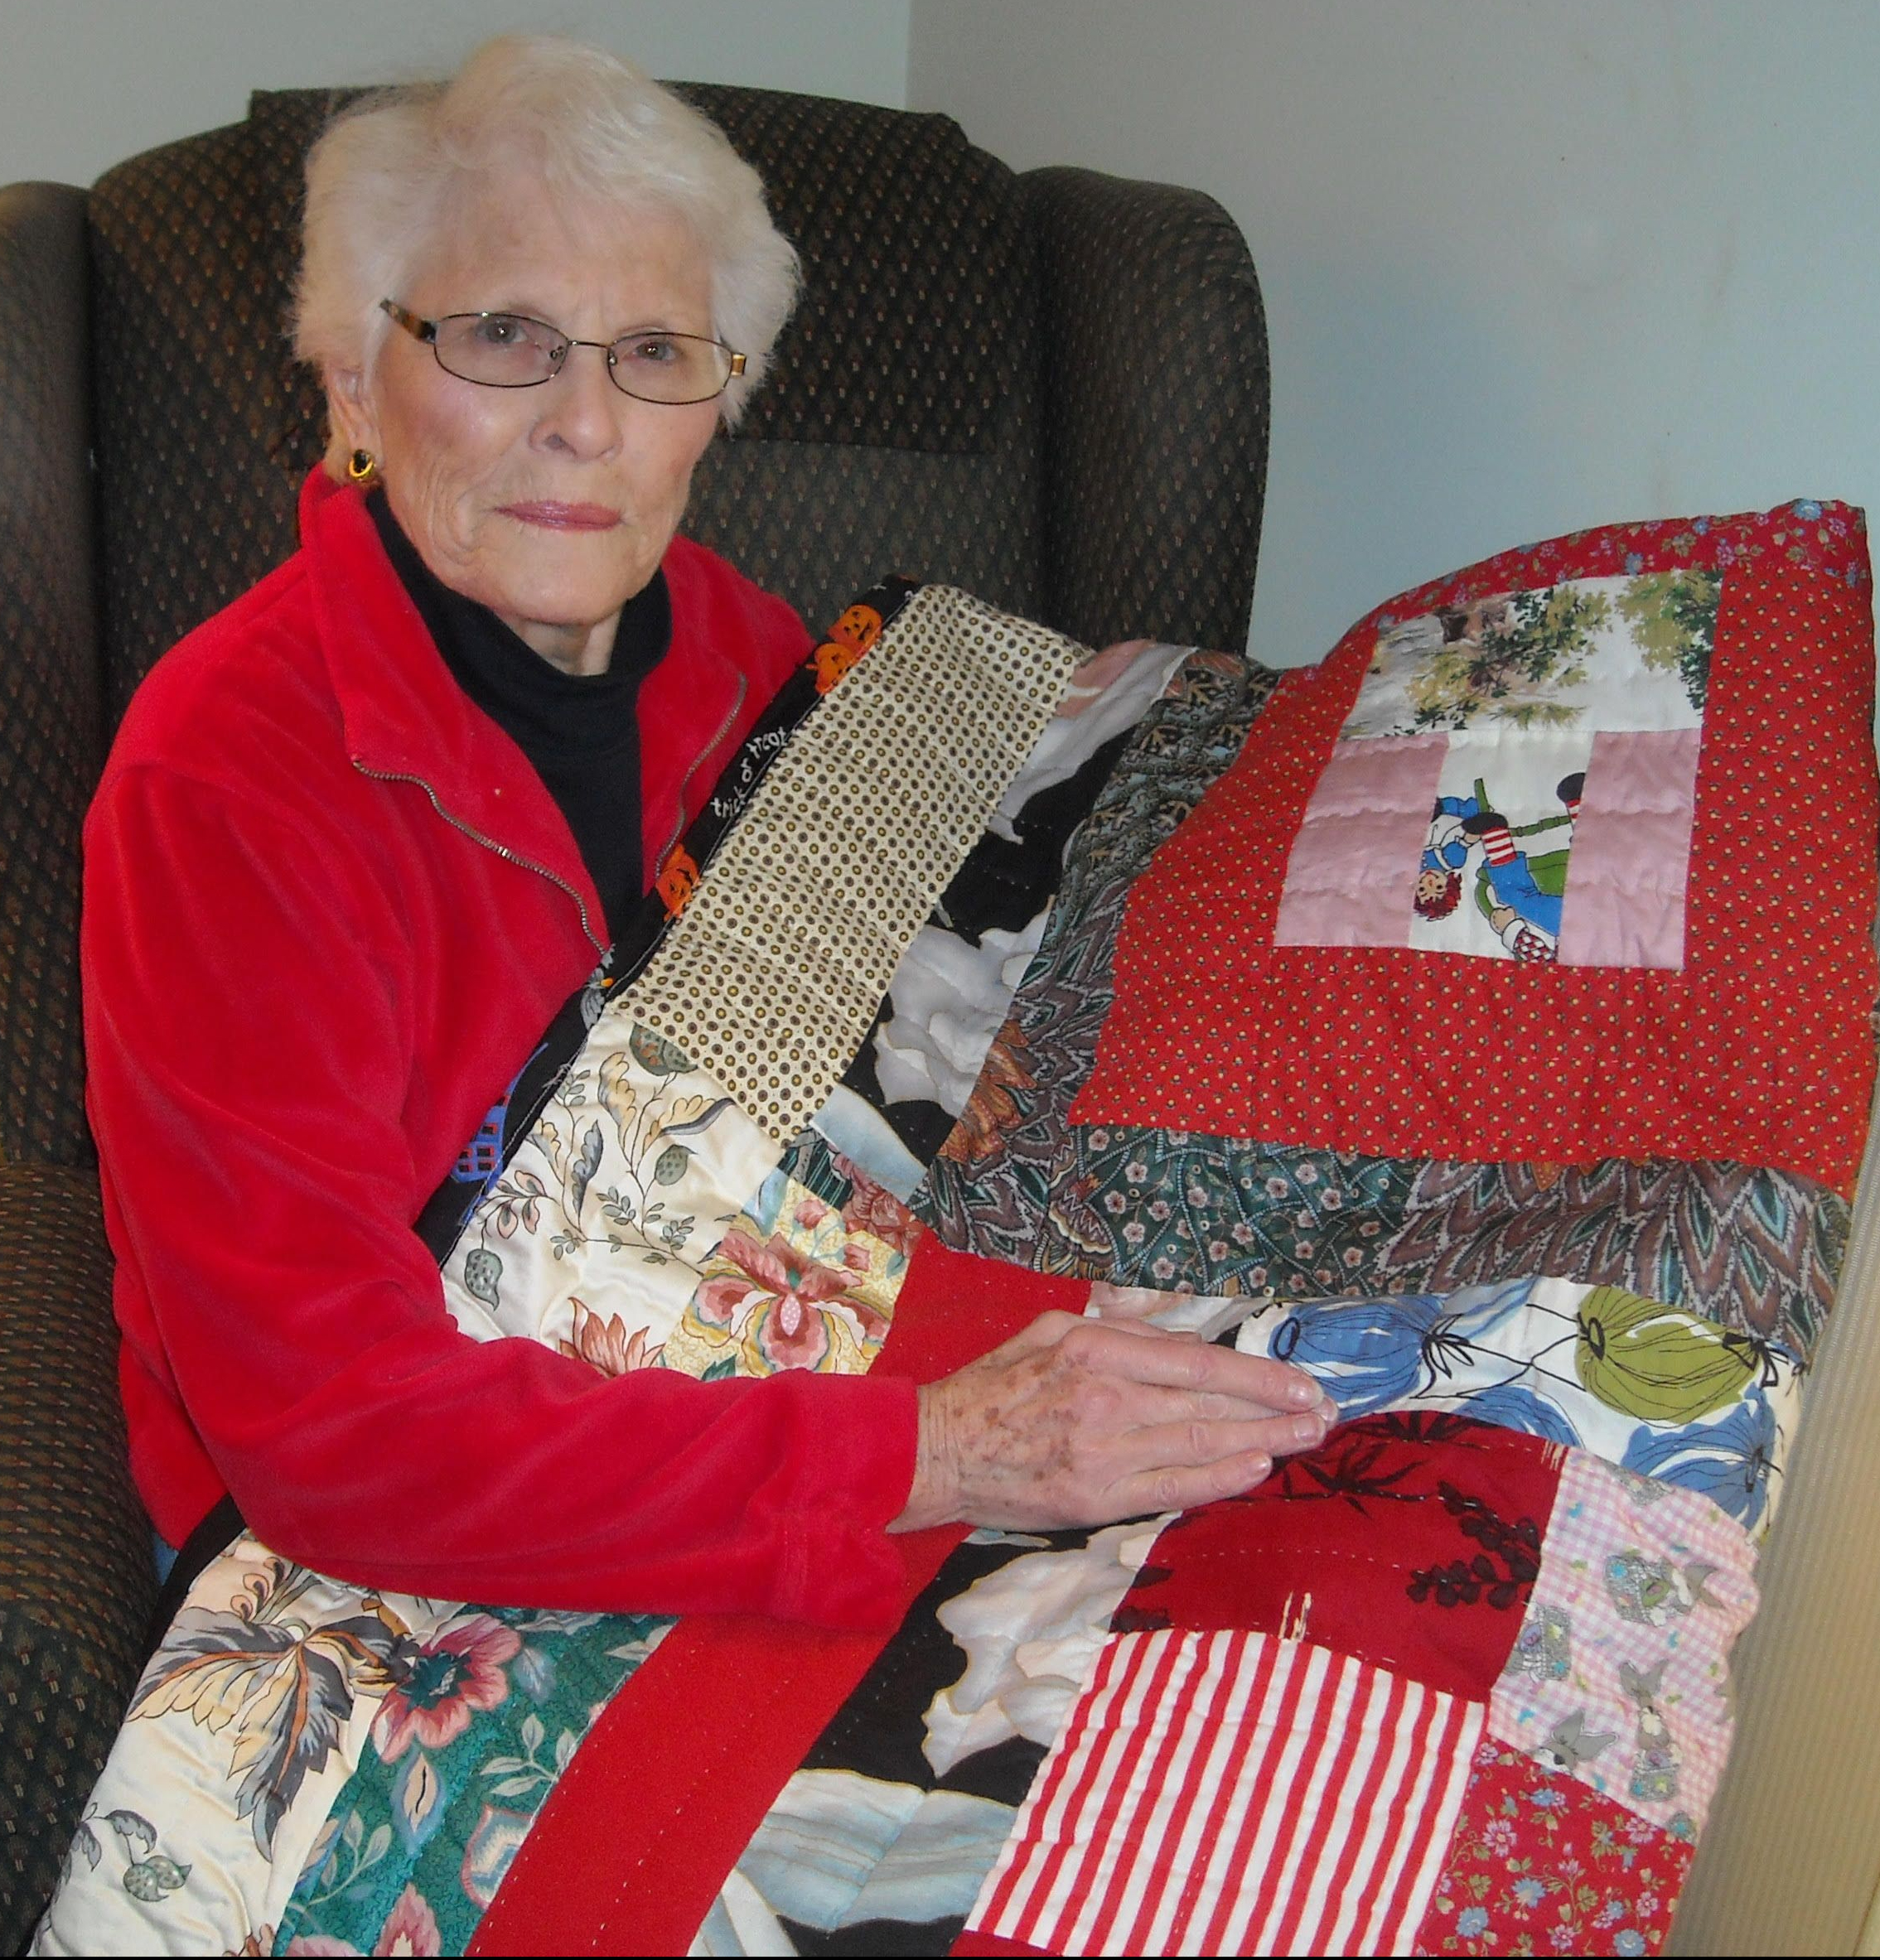 Jan Dolland, Gee's Bend Quilter's advocate and quilt collector